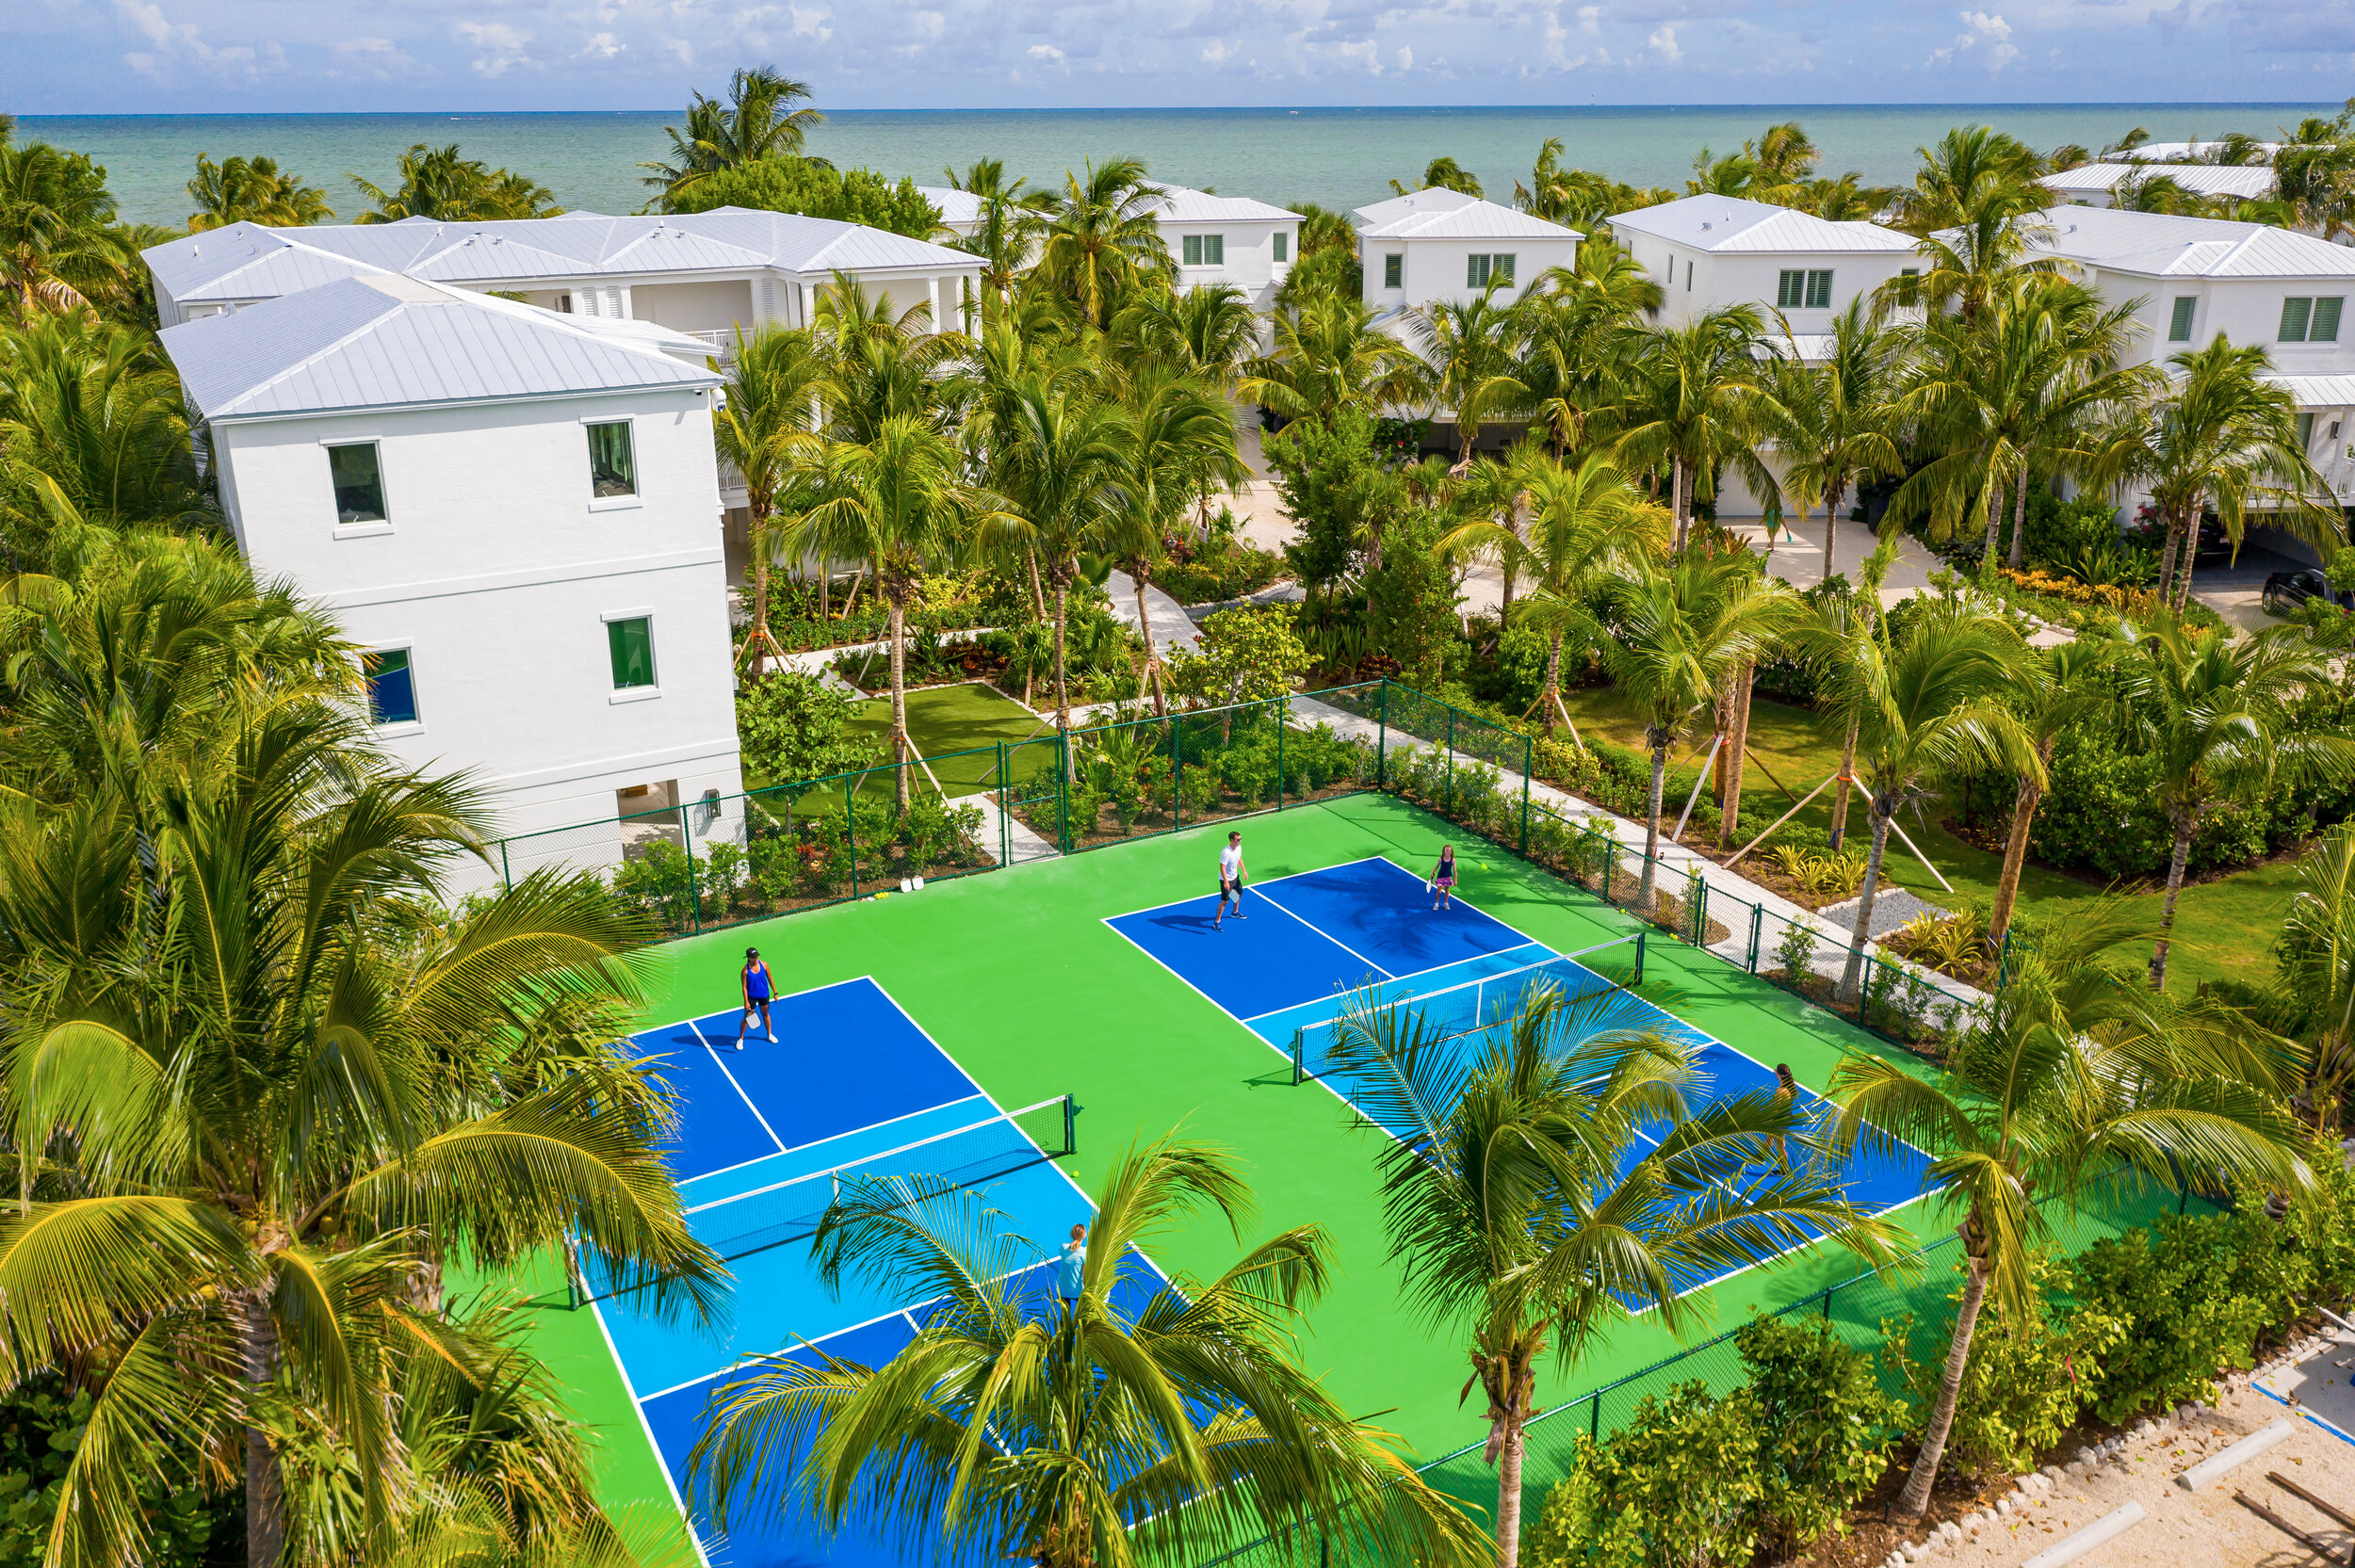  Aerial view of The Islands of Islamorada’s pickleball courts surrounded by palm trees and a view of the Atlantic Ocean. 